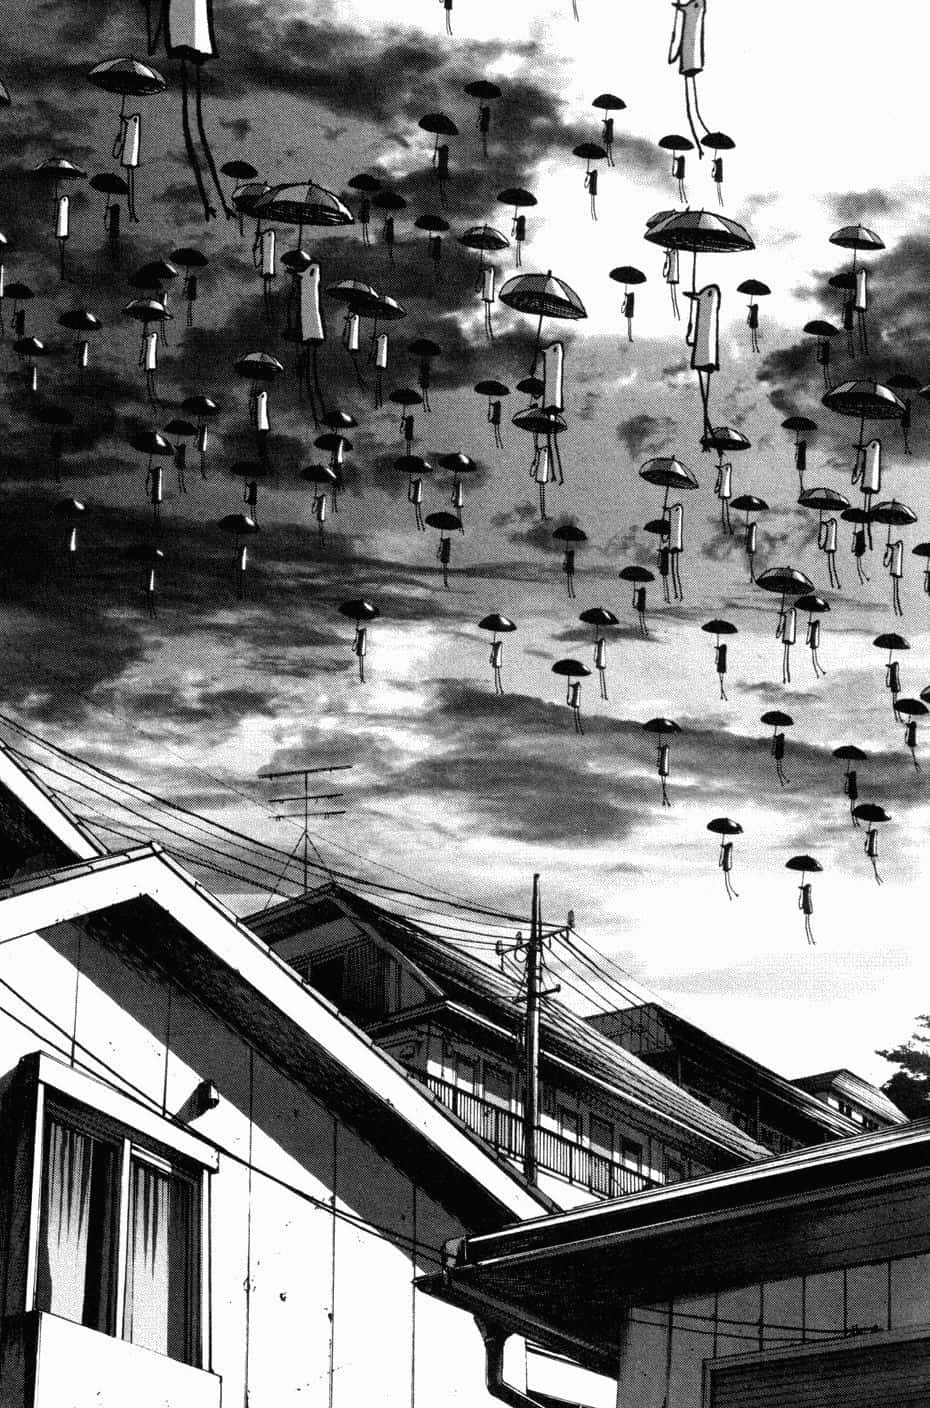 A Black And White Image Of A City With Many Flying Objects Wallpaper